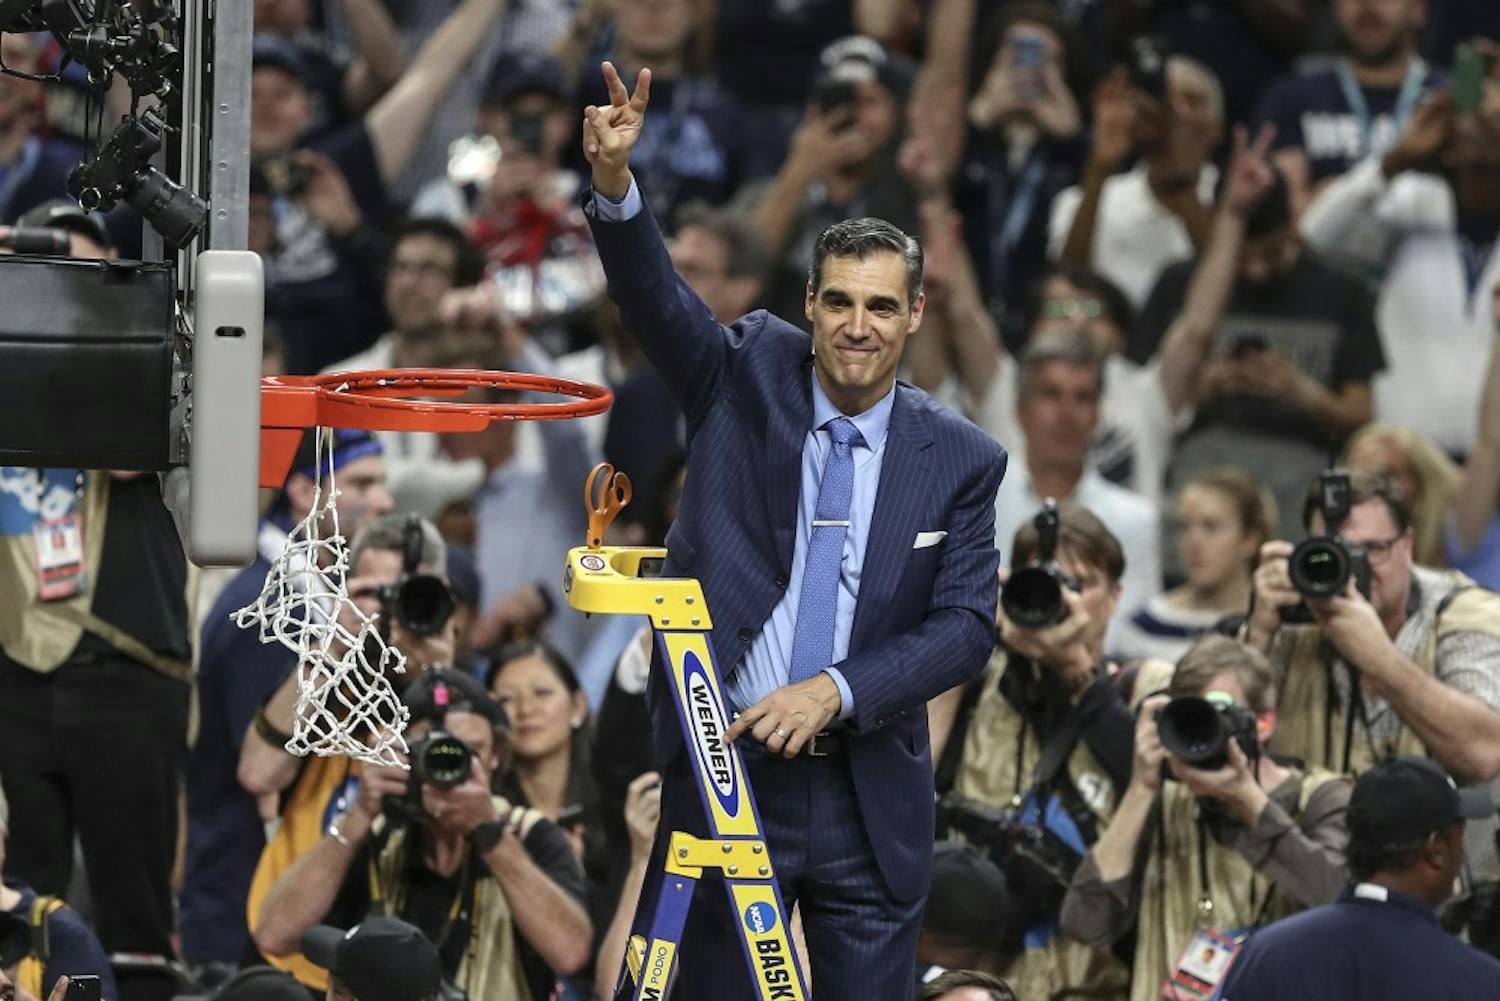 Villanova head coach Jay Wright waves the Villanova "V" to the fans while cutting the net after beating Michigan to win the NCAA National Championship on Monday, April 2, 2018, at the Alamodome in San Antonio, Texas. The Villanova team is the National Champion, beating Michigan 79-62.&nbsp;